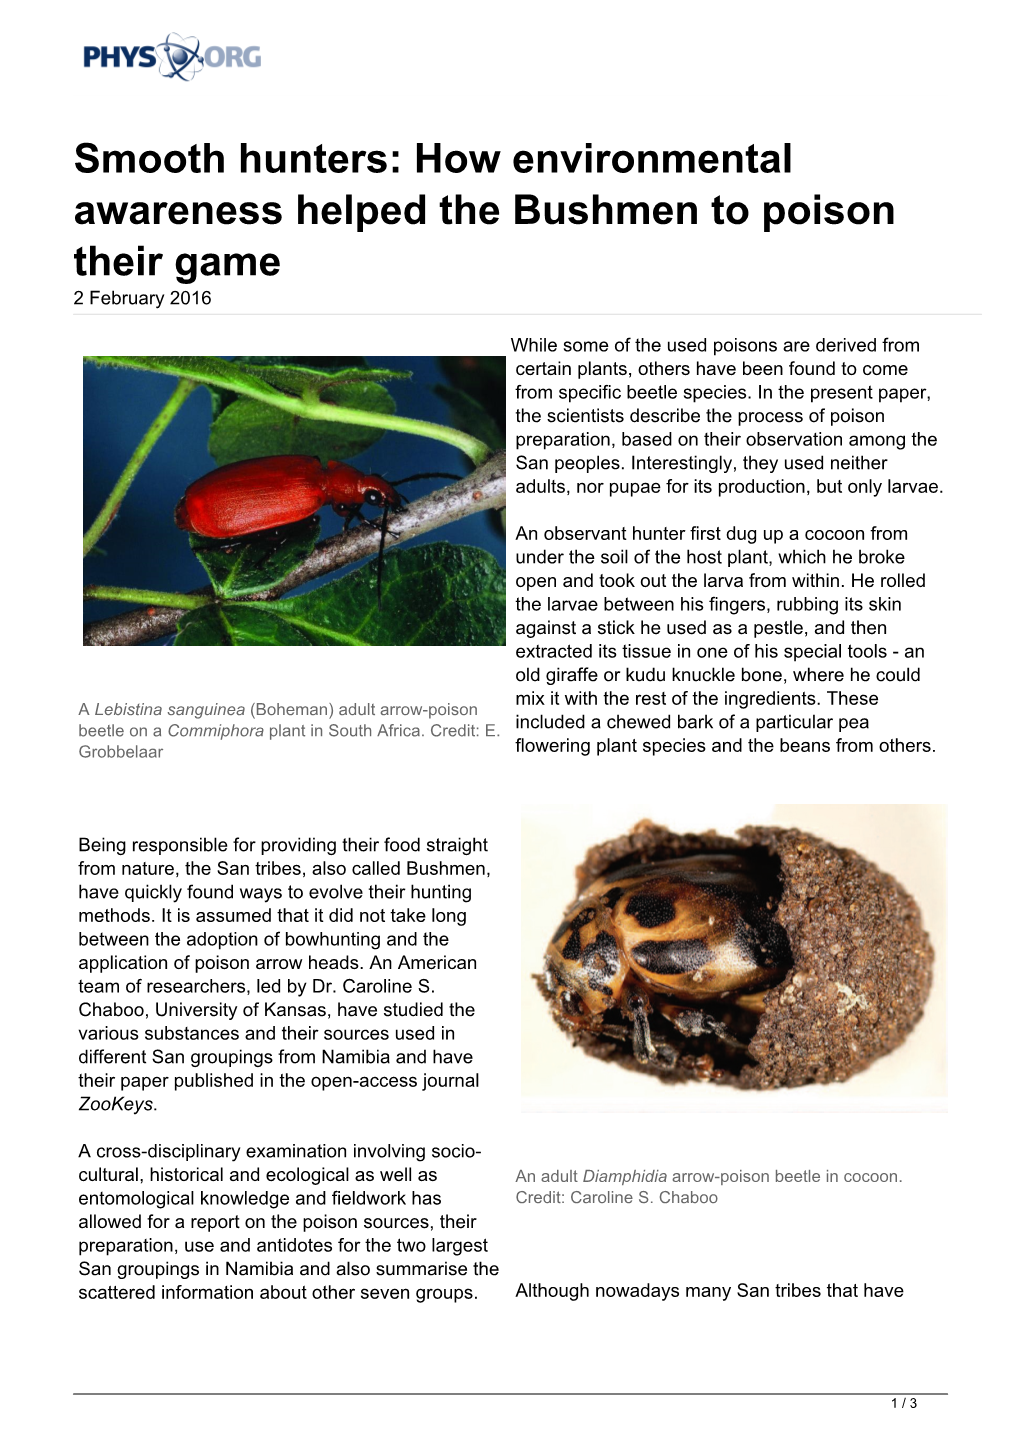 Smooth Hunters: How Environmental Awareness Helped the Bushmen to Poison Their Game 2 February 2016